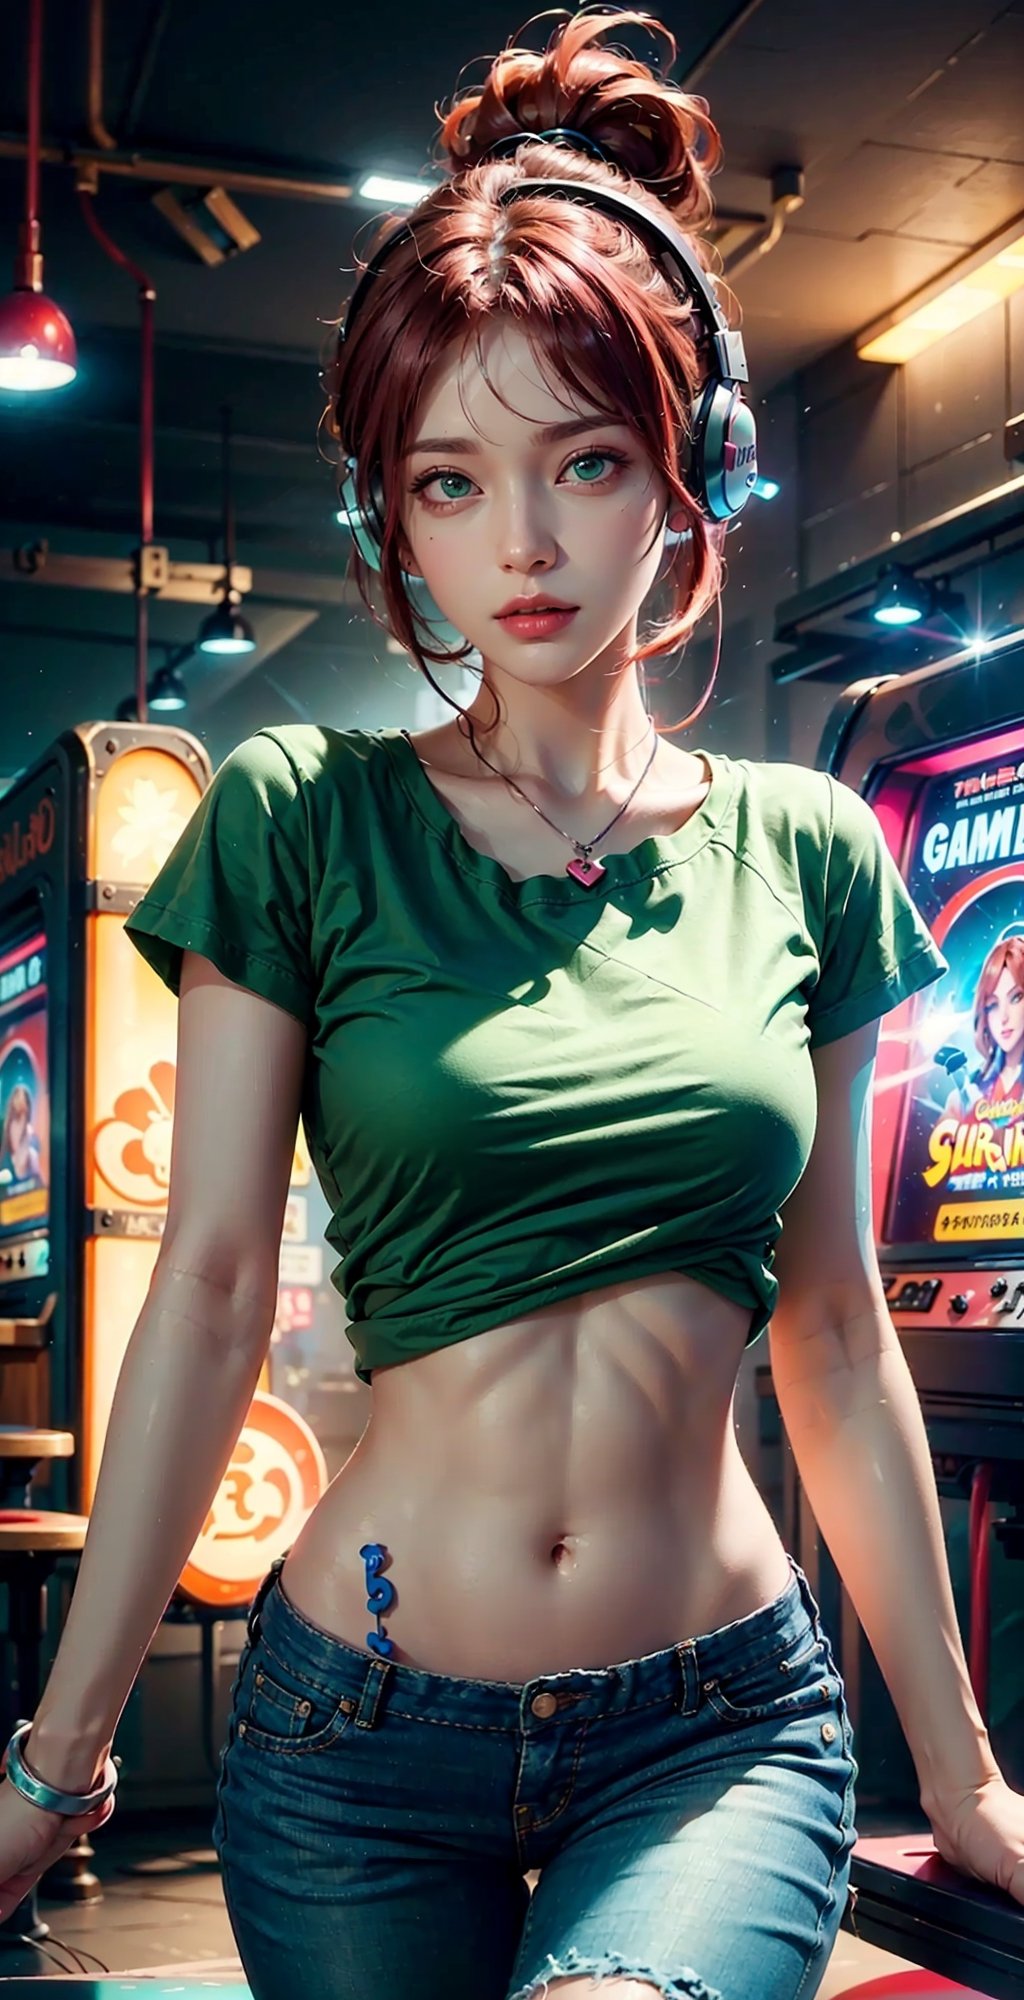 photography awards, masterpiece, red hair, green eyes, photorealistic, high resolution, soft light, pink t-shirt, Fitted top,  1women, solo, hips up, Gamer girl, Game center, arcade, shining skin, dynamic pose, bright, Game center background, high background detail, dim light, night, pink headphone